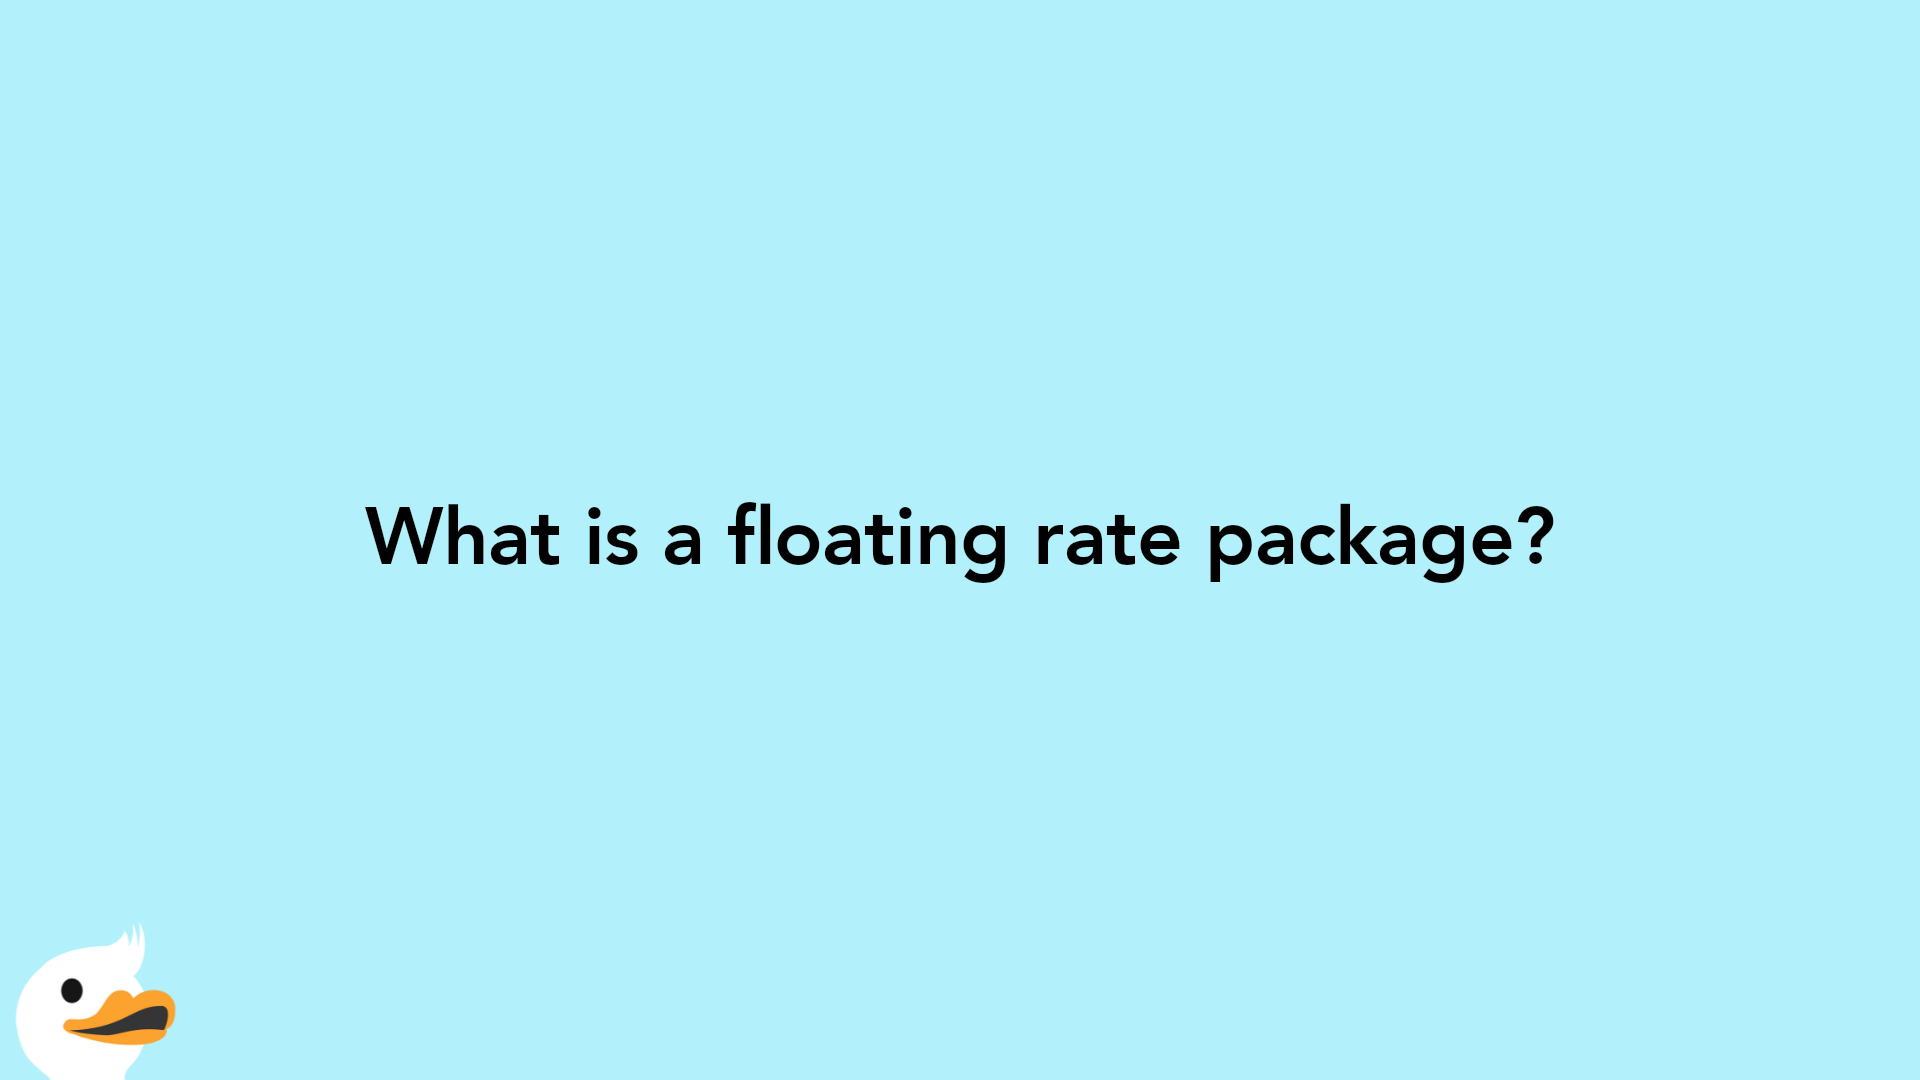 What is a floating rate package?